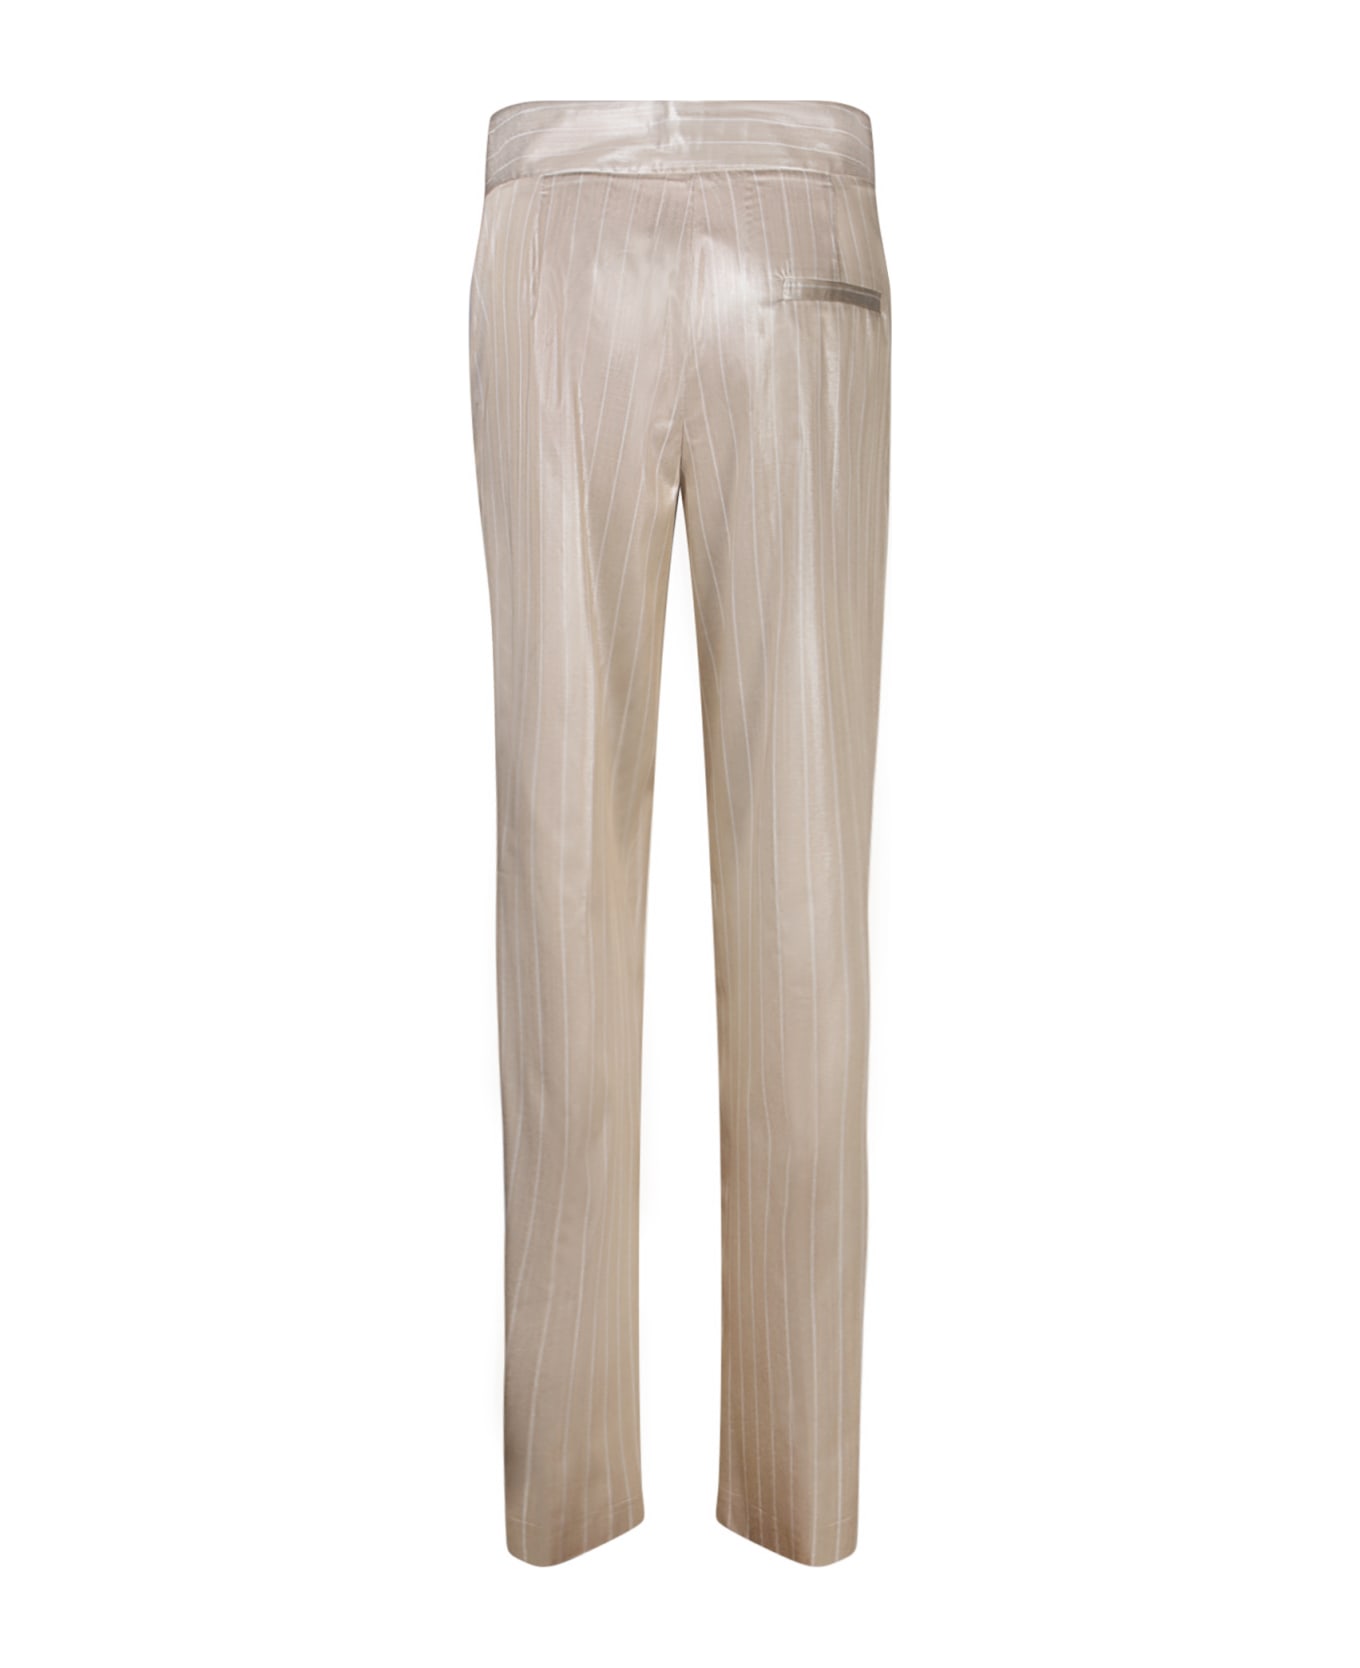 Genny Satin Striped Sand Trousers - Beige ボトムス